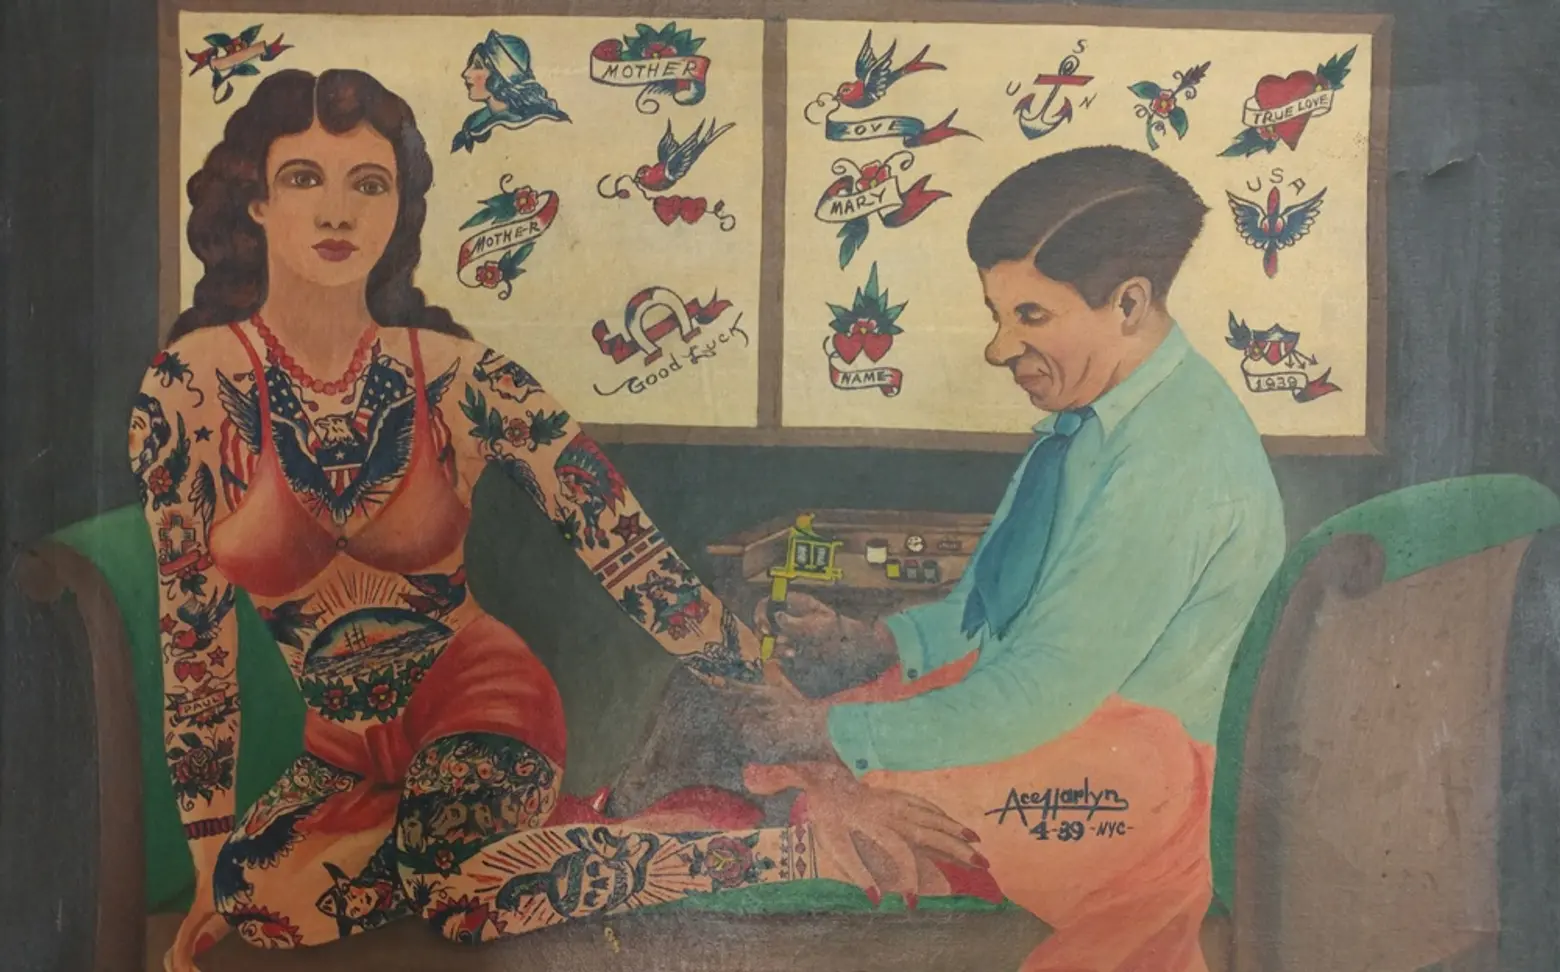 The history of tattooing in NYC – and its 36-year ban